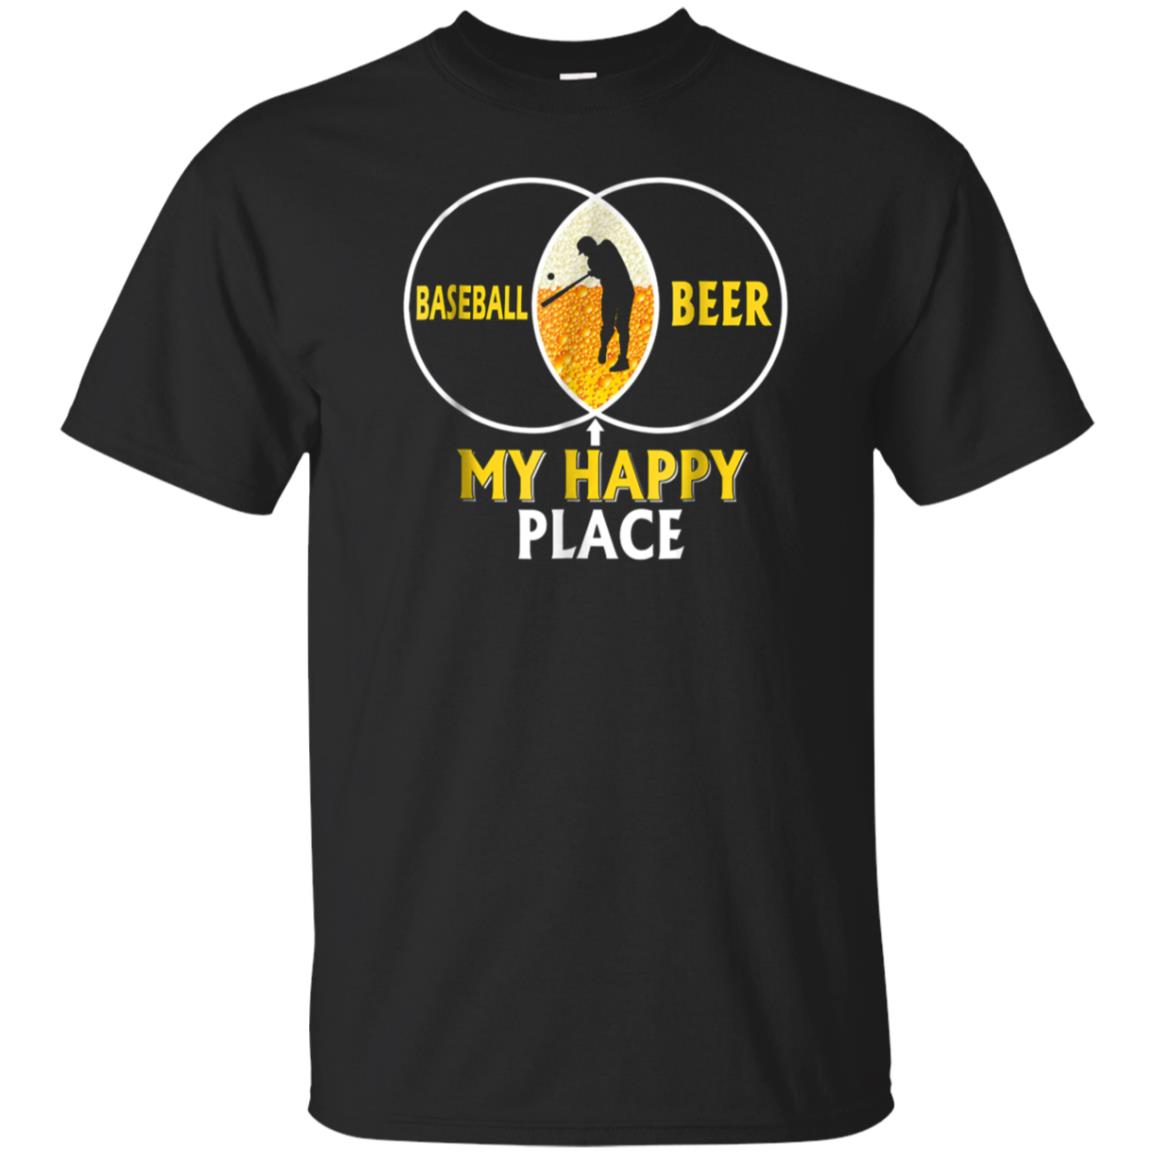 Baseball Beer My Happy Place Funny T-shirt